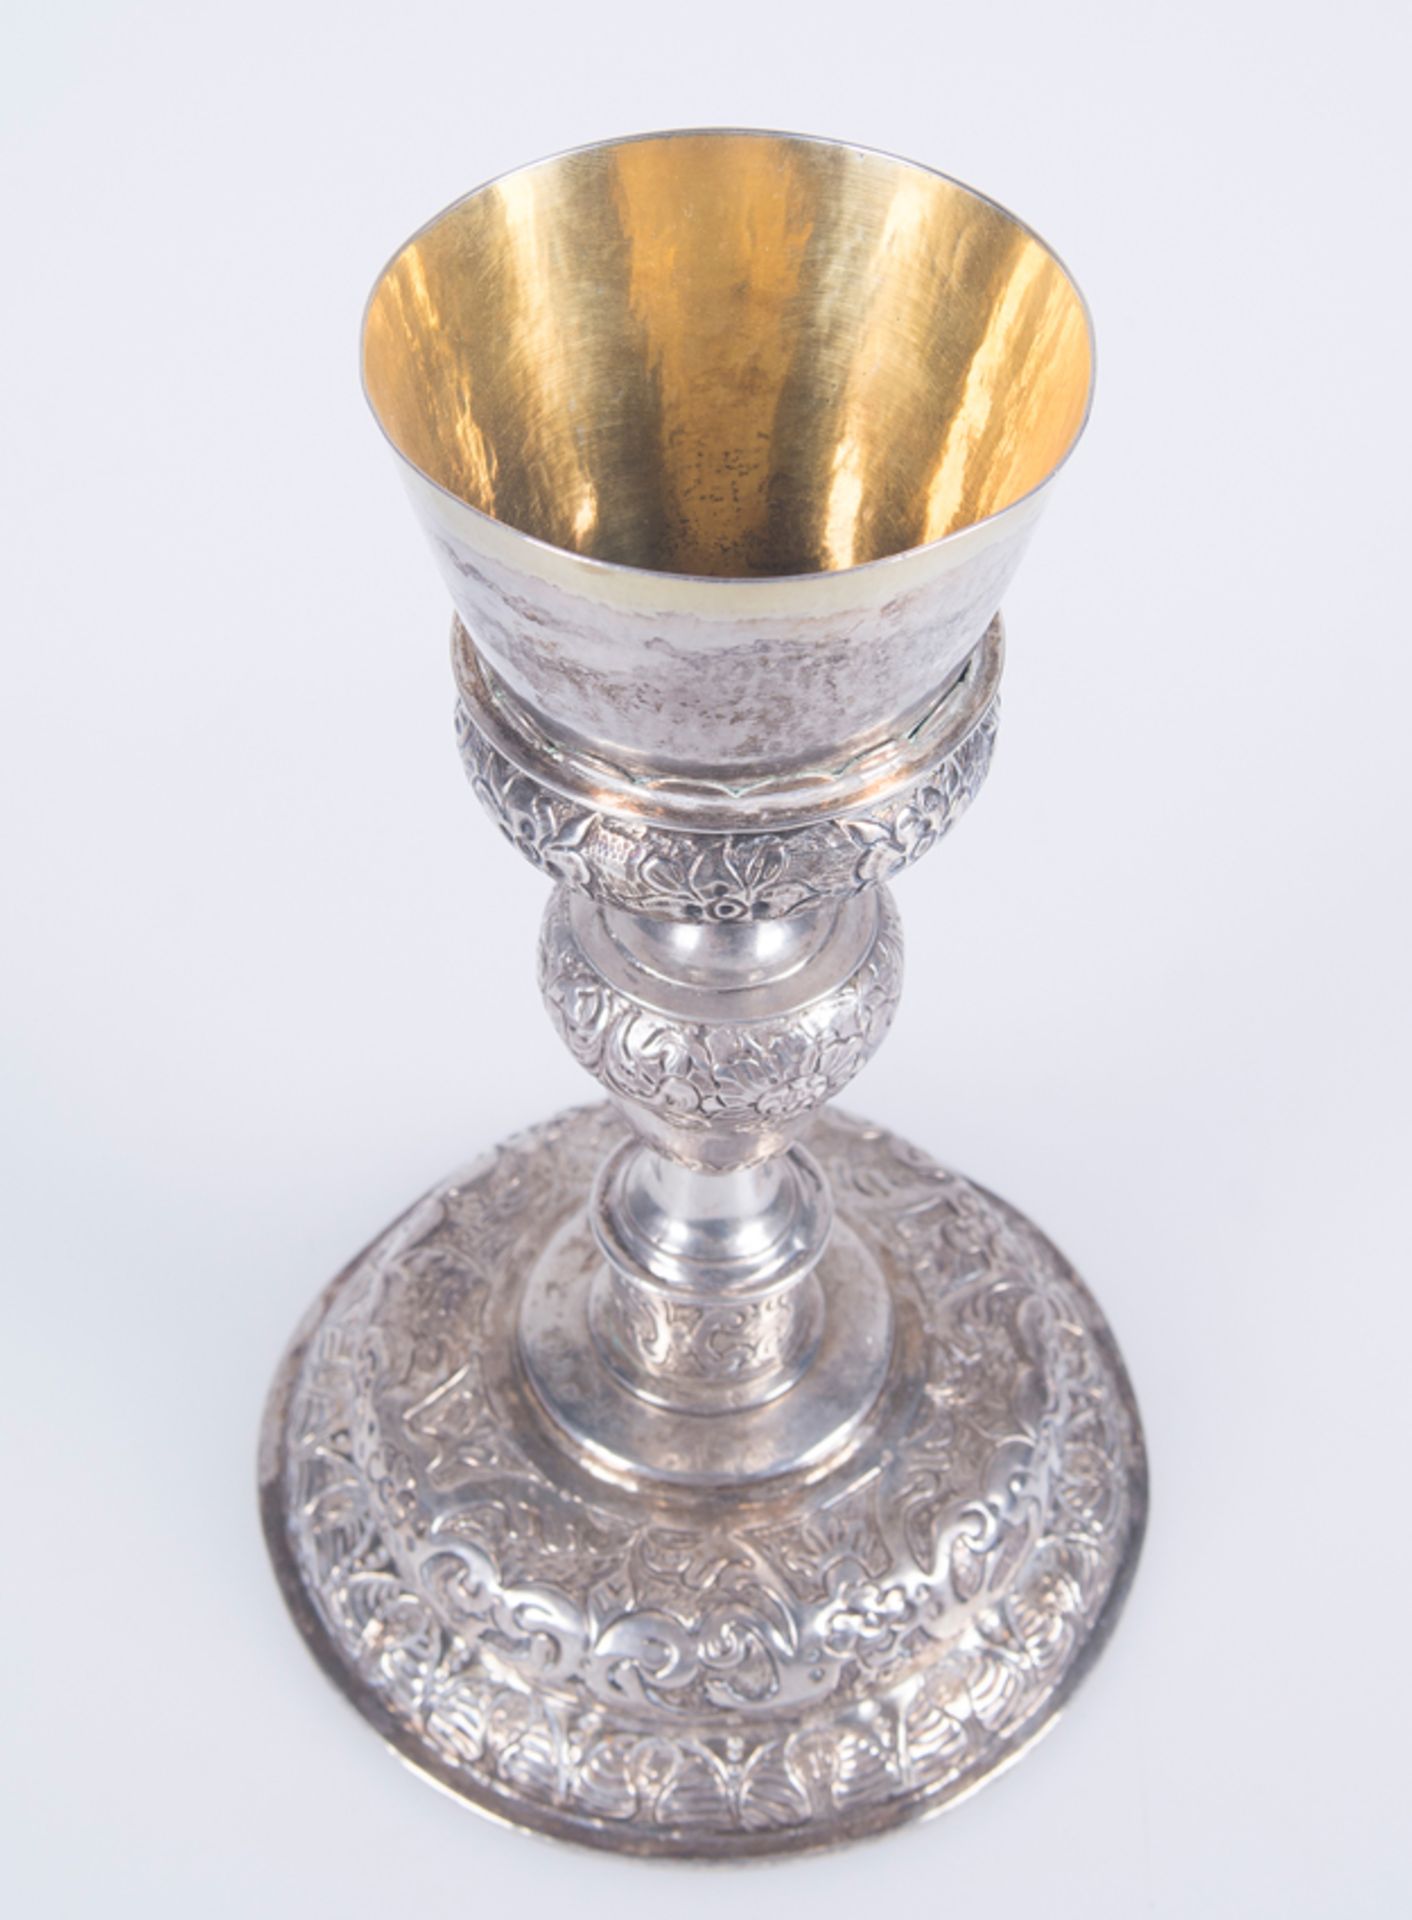 Embossed and chased silver chalice with a silver vermeil interior. Possibly Mexican. Late 16th cent - Bild 3 aus 8